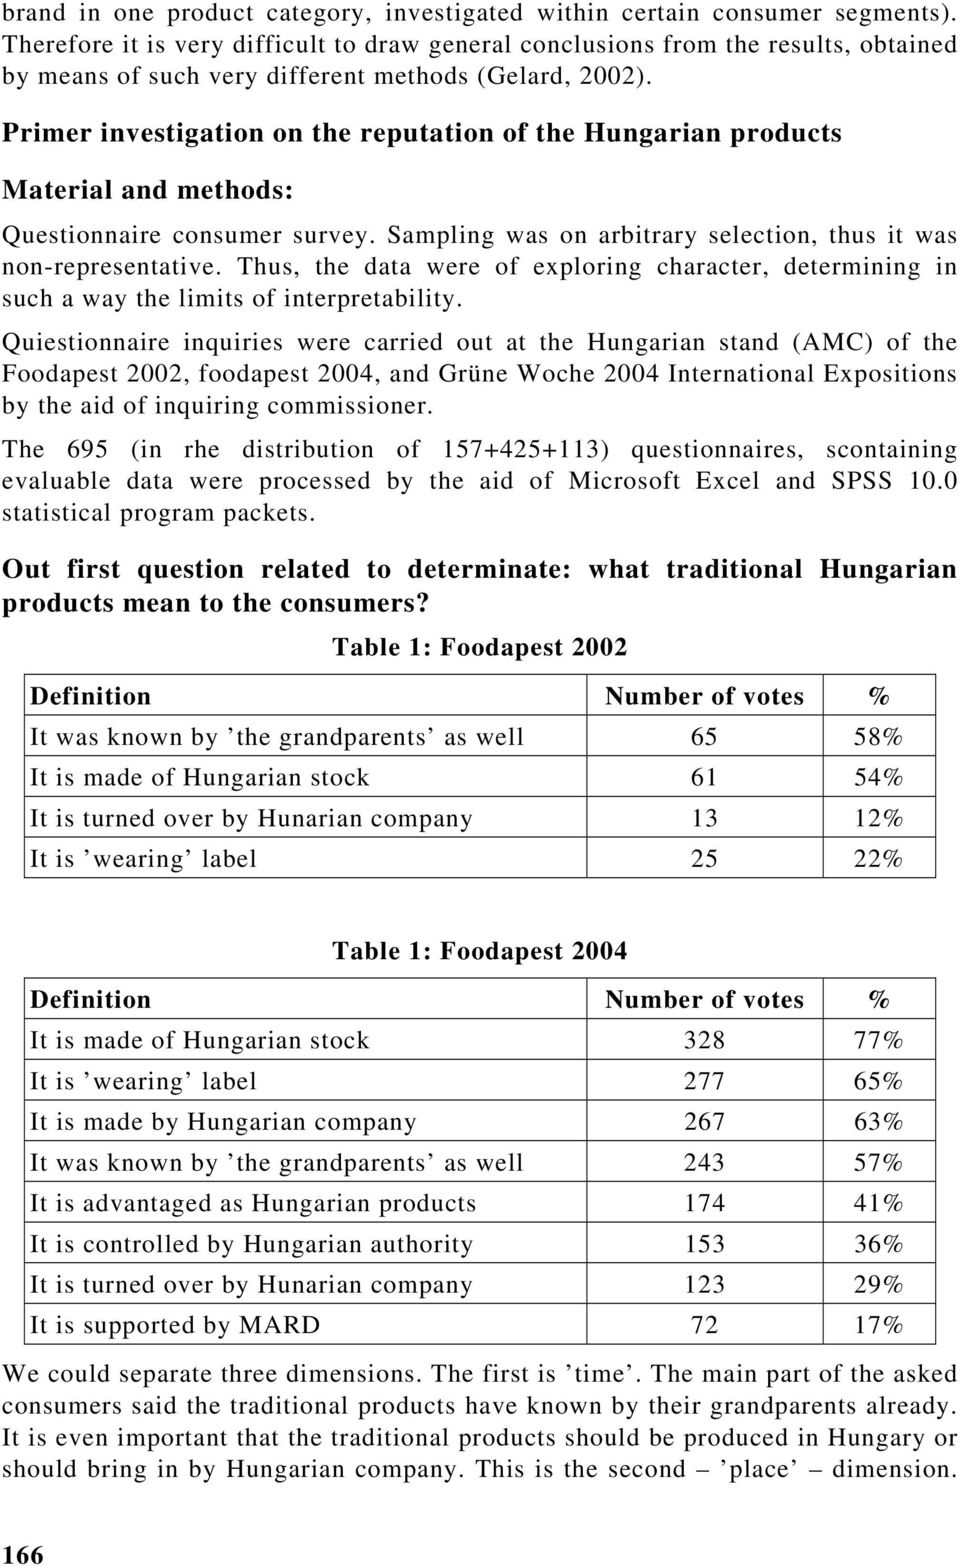 Primer investigation on the reputation of the Hungarian products Material and methods: Questionnaire consumer survey. Sampling was on arbitrary selection, thus it was non-representative.